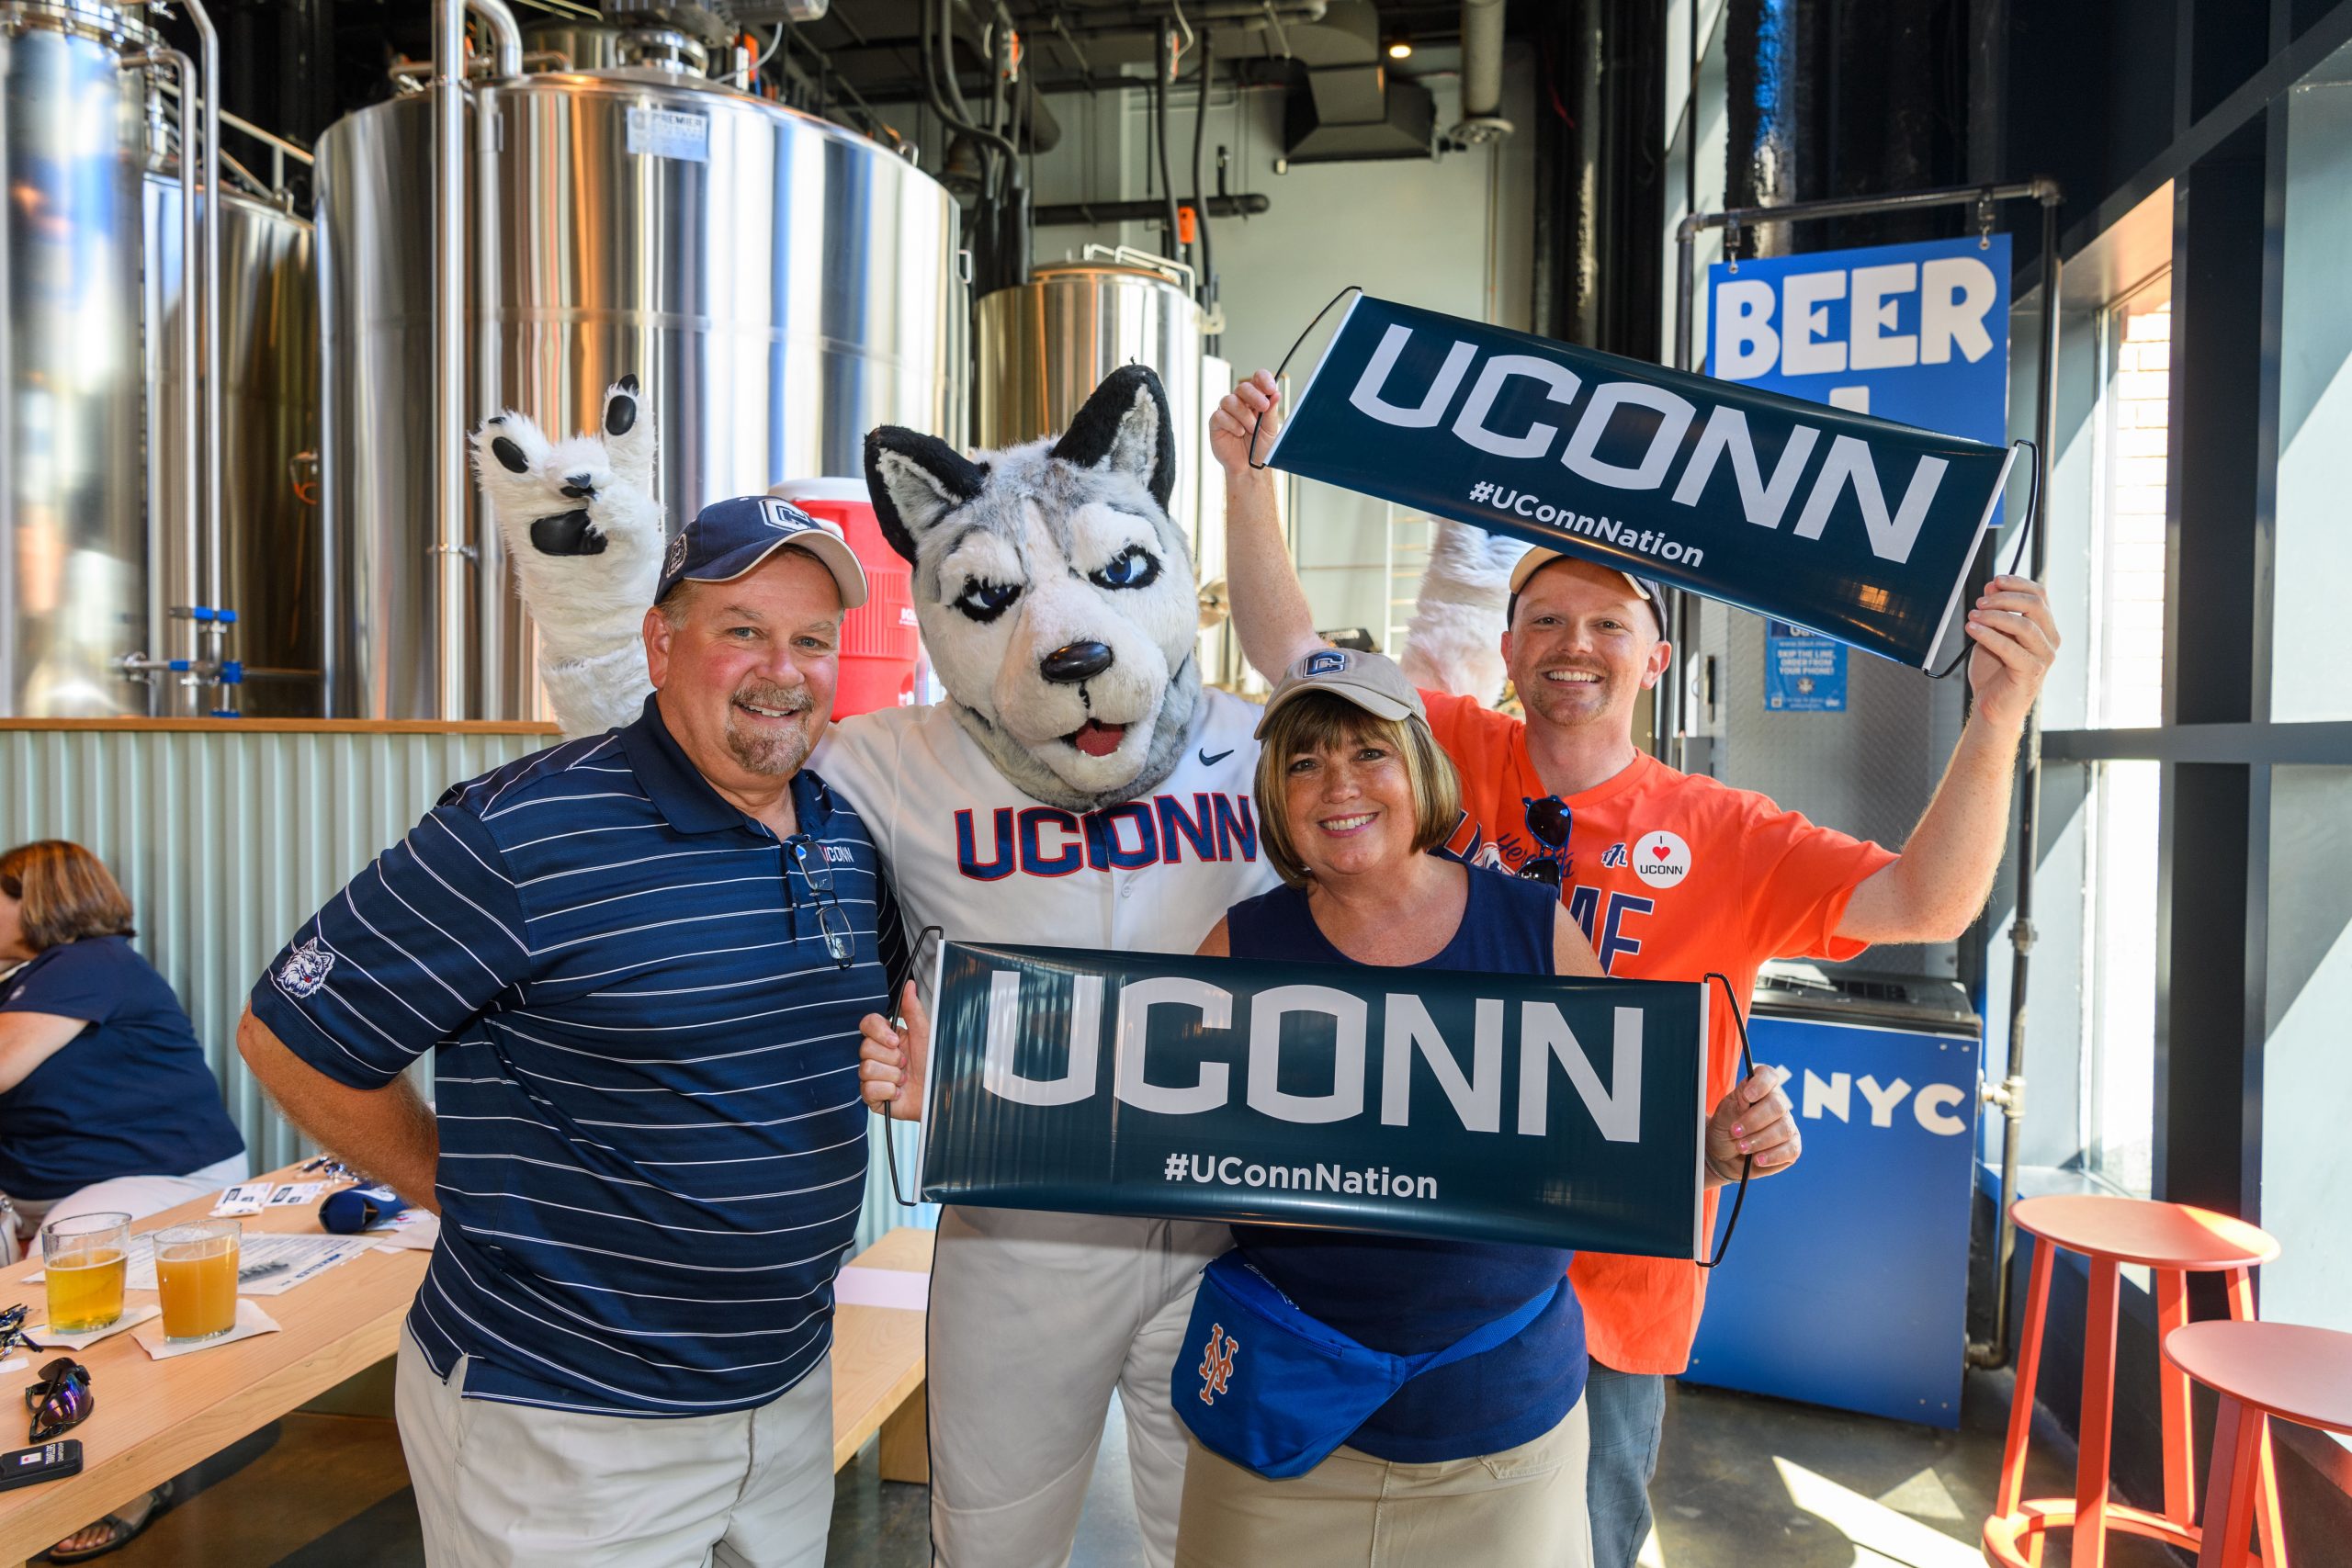 The costumed Jonathan the Husky mascot, wearing a baseball uniform, poses for a photo with three middle-aged UConn fans holding UConn banners at in front of large metal beer brewing vats at an alumni event before a New York Mets baseball game.